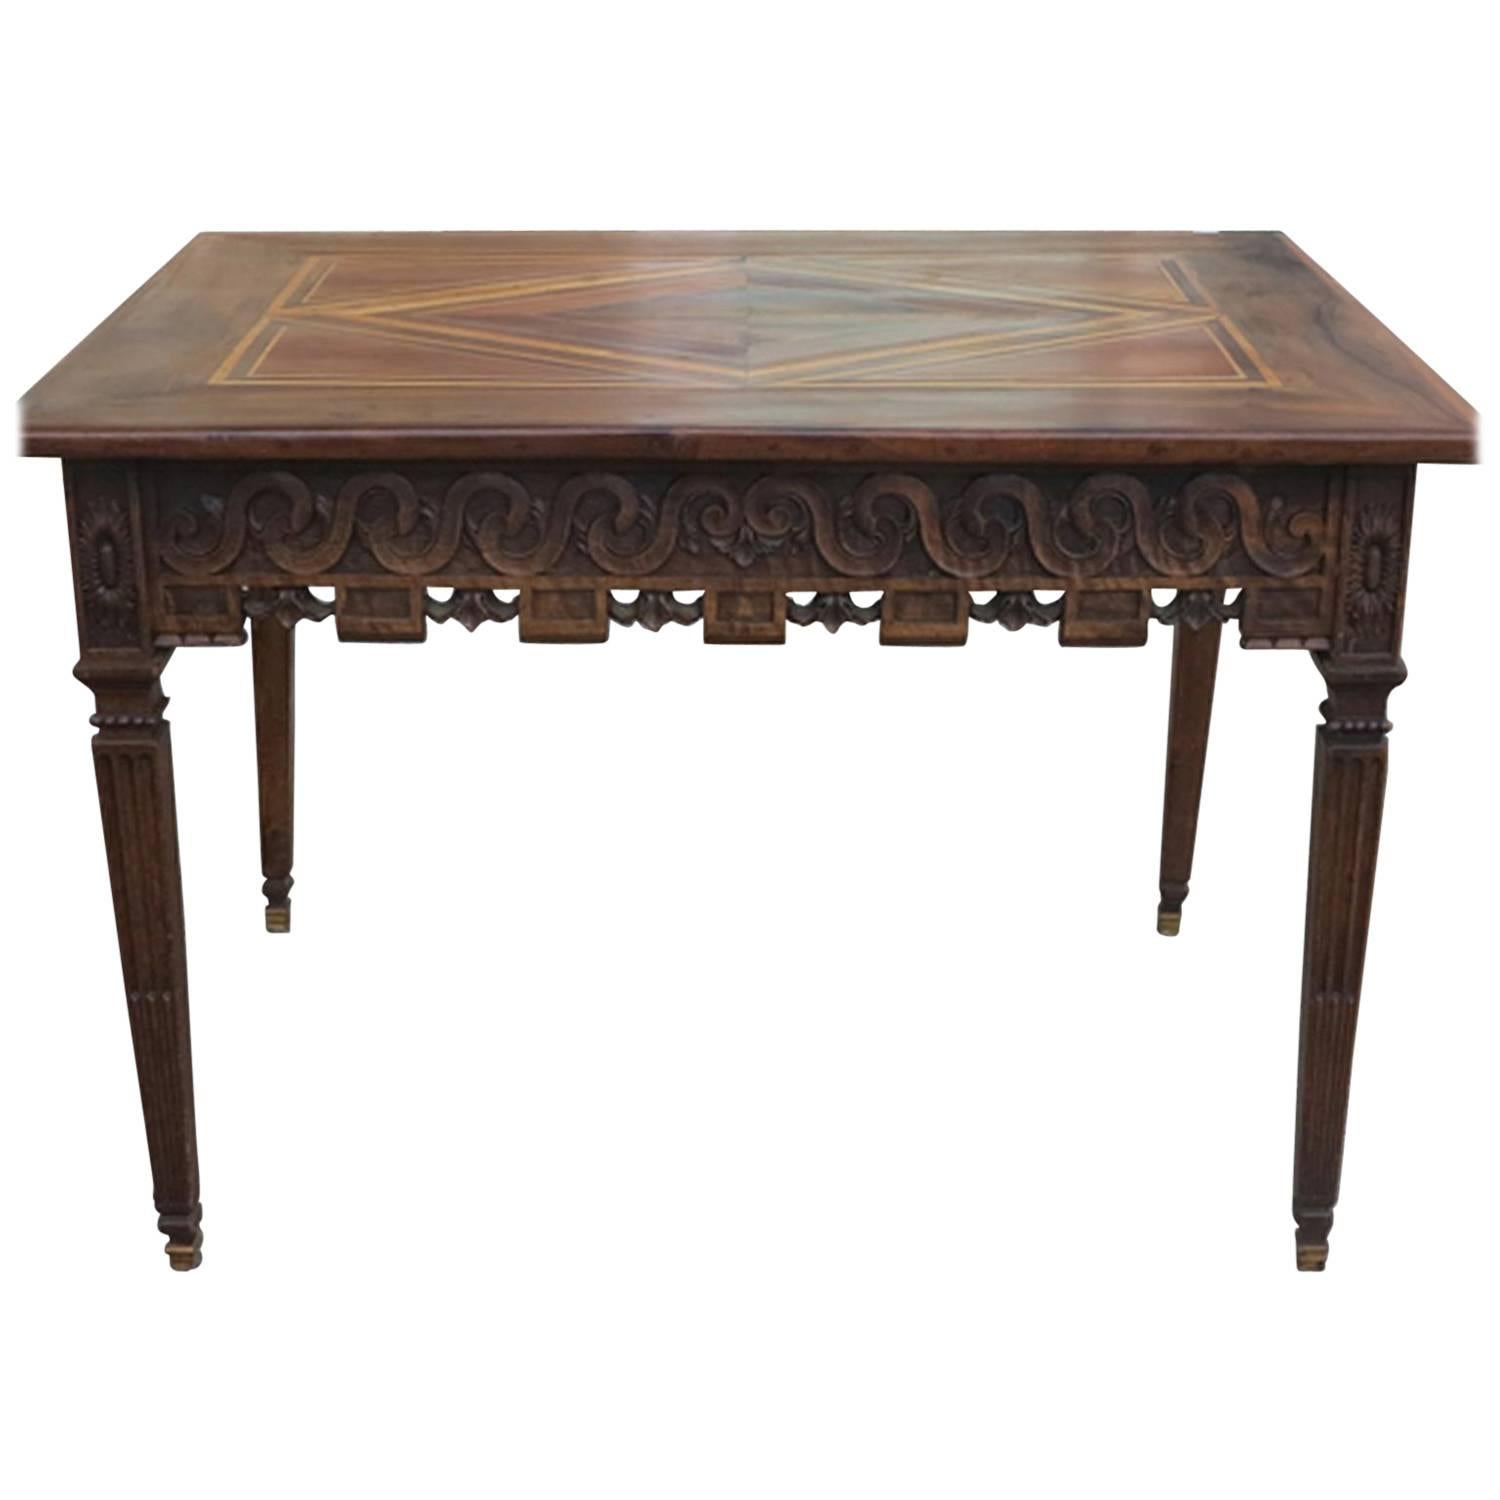 Unique Louis XVI table, beautifully carved apron and legs, the top with a stunning rhombus veneer decor. Two drawers. A combination of walnut and elm. In excellent condition. 
Beautiful example of a provincial Louis XVI table which combines a